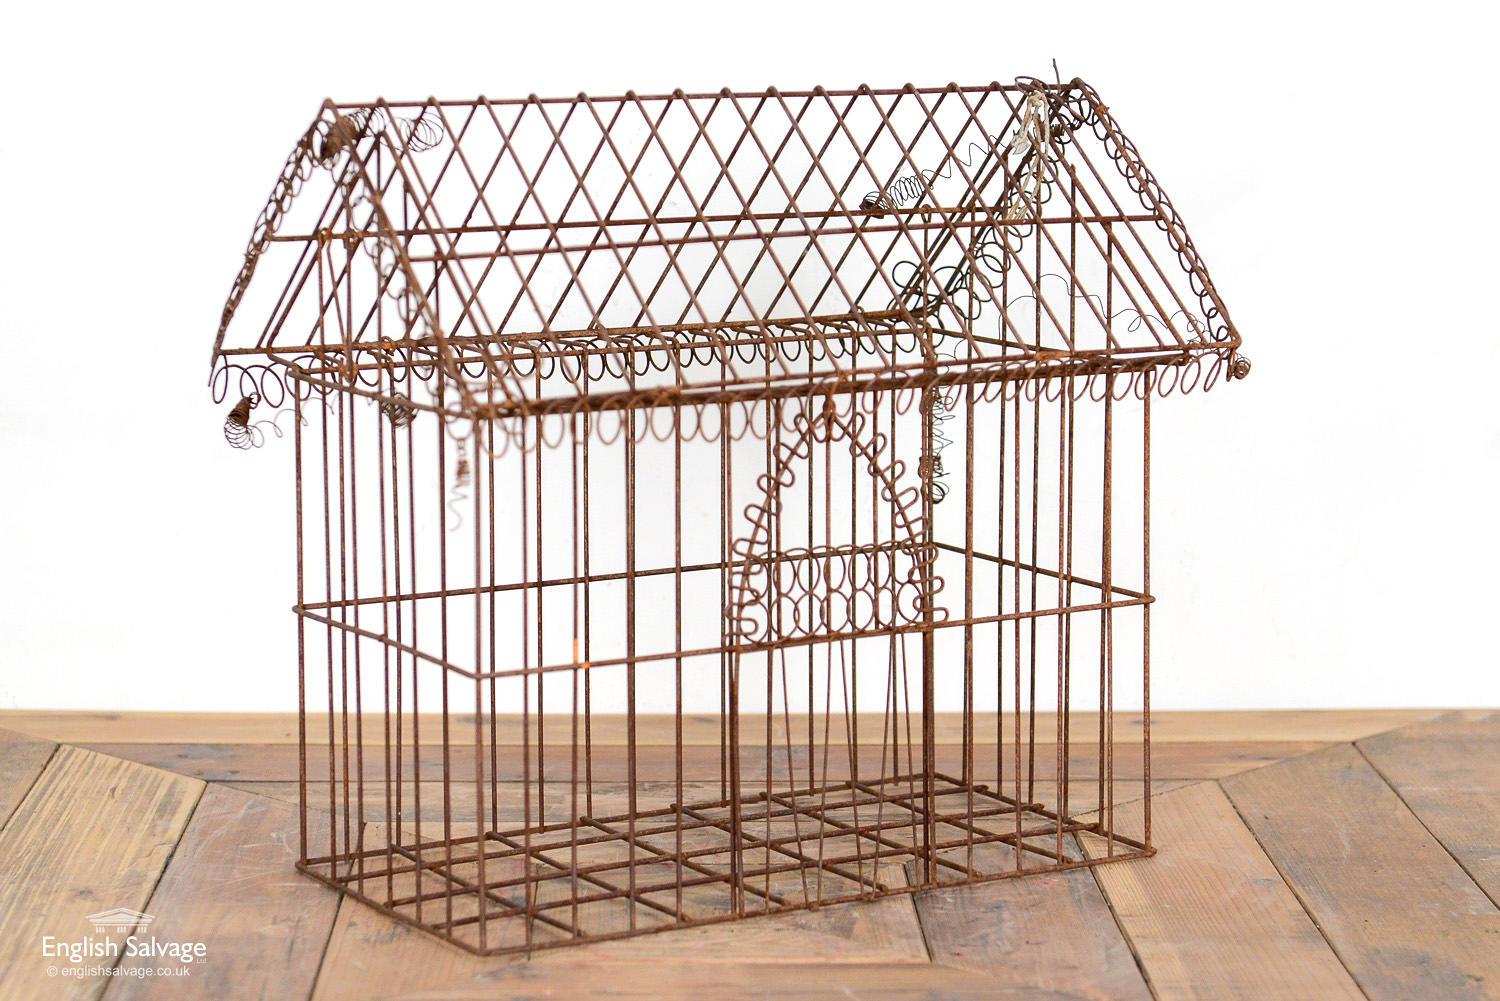 Old Victorian wirework house with an opening roof. Decorative door and roof edging. Would look great with plants planted inside it. 

Some loose wirework throughout, commensurate with age but main structure is sound.